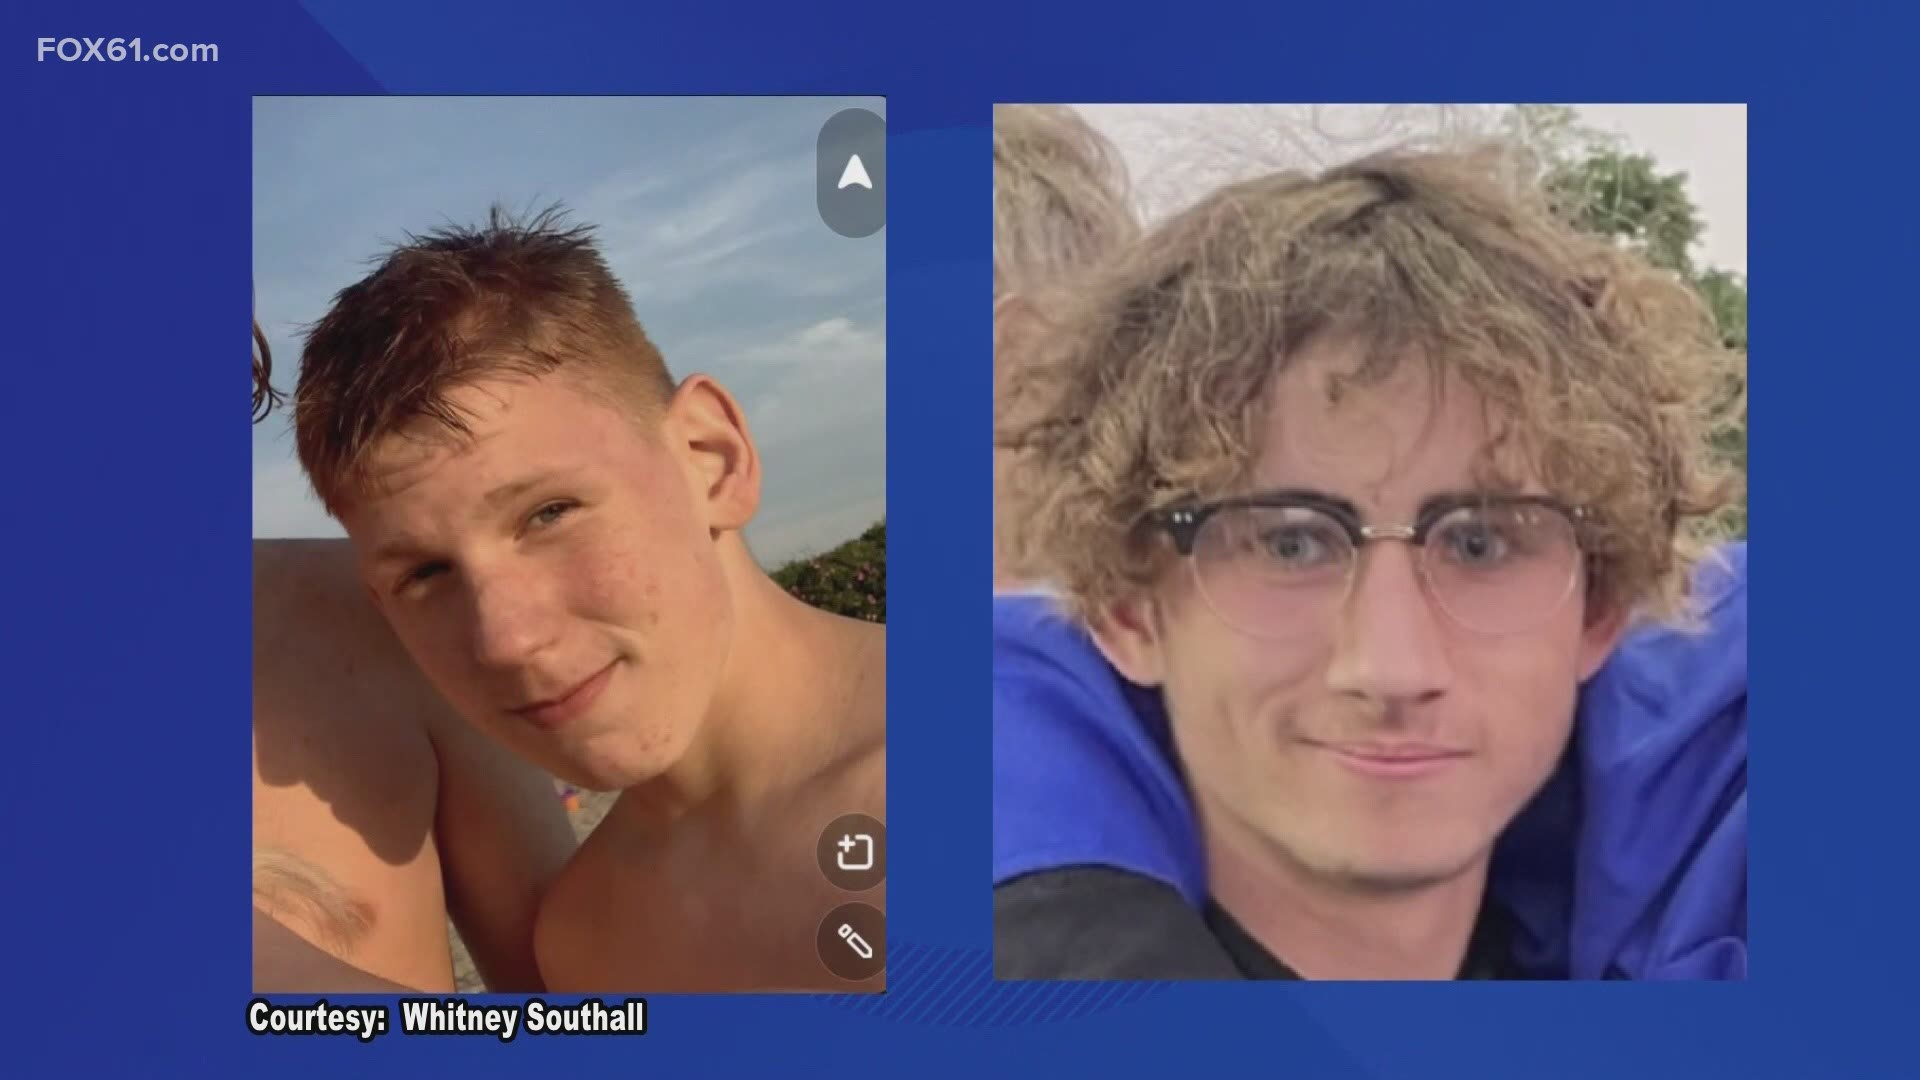 15-year-old Lucas Brewer was last seen in the Farmington river with a visiting friend. After an intense search, both were found Monday afternoon